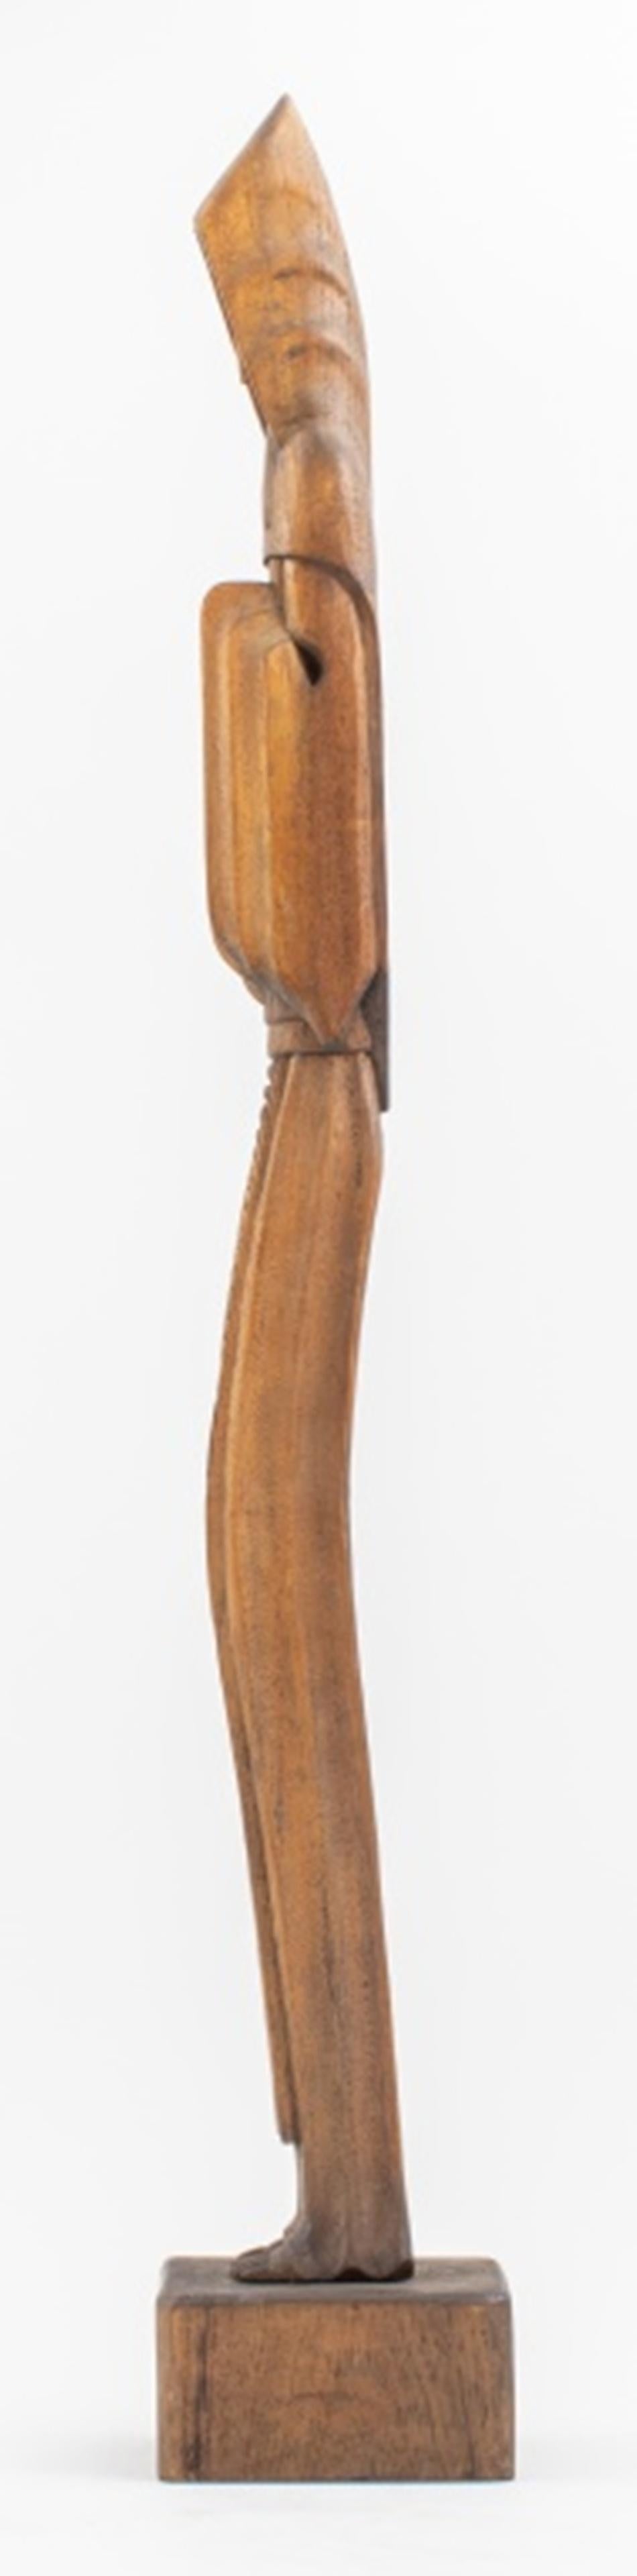 Paraguayan Modern Hooded Monk Wood Sculpture In Good Condition For Sale In New York, NY